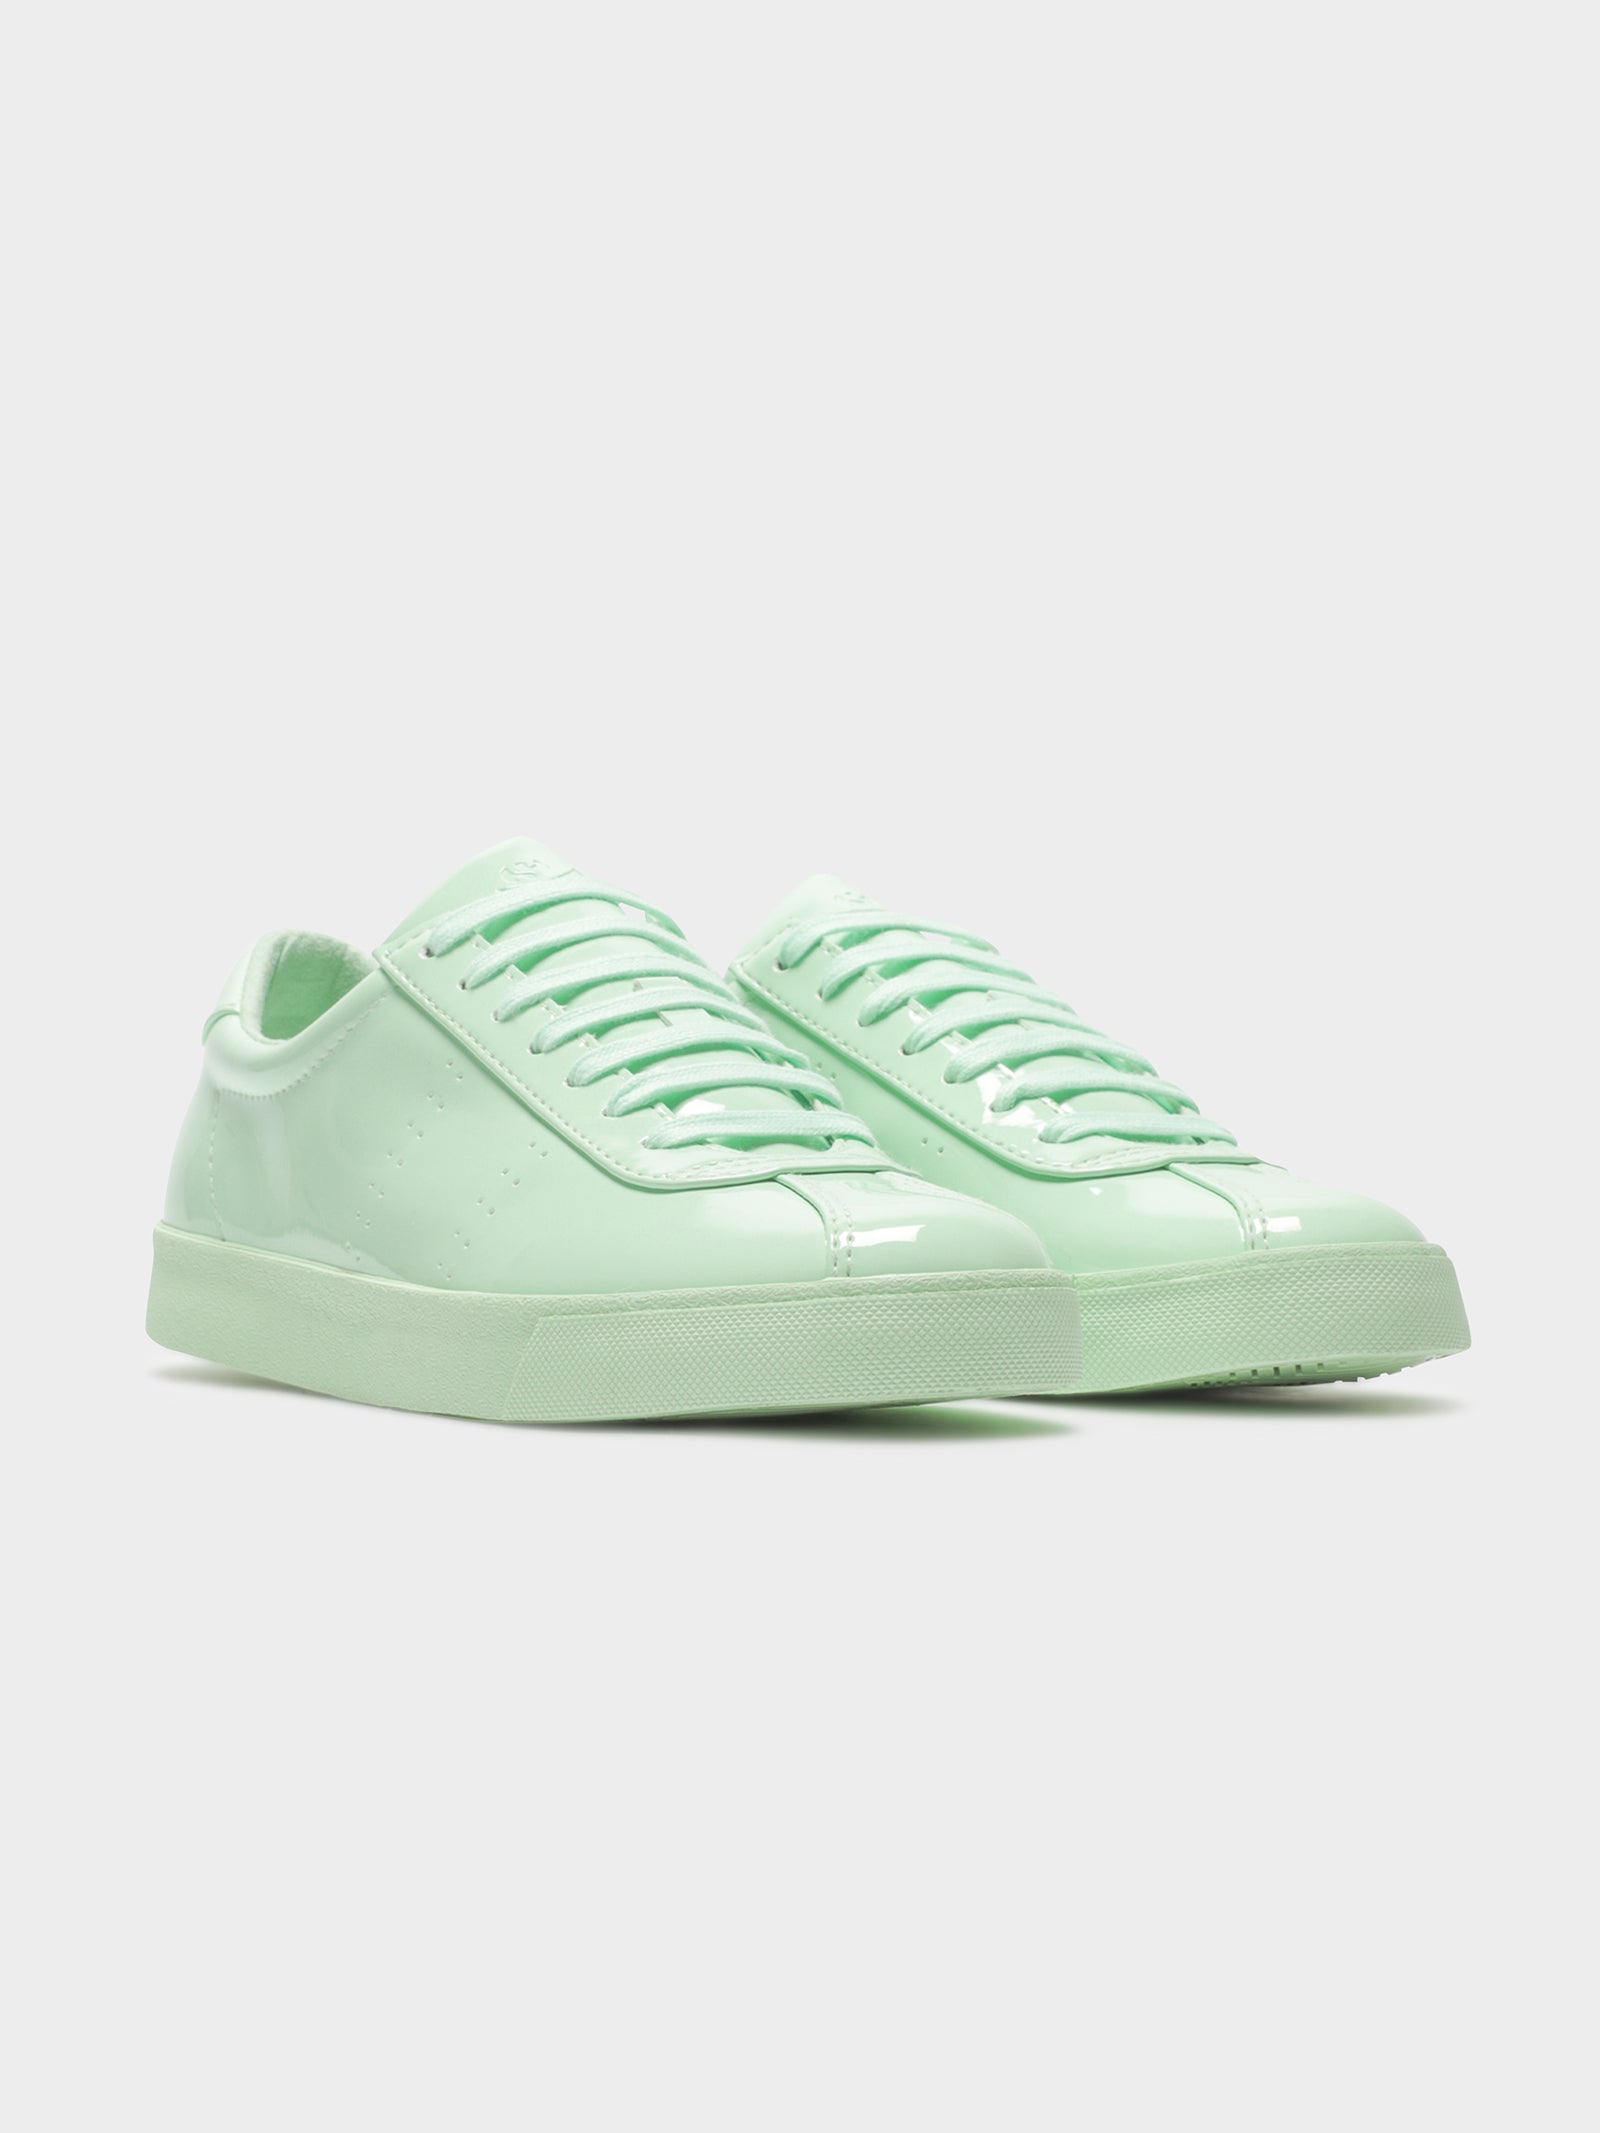 Womens 2843 Clubs Syneaw Pastel Sneakers in Mint Green - Glue Store